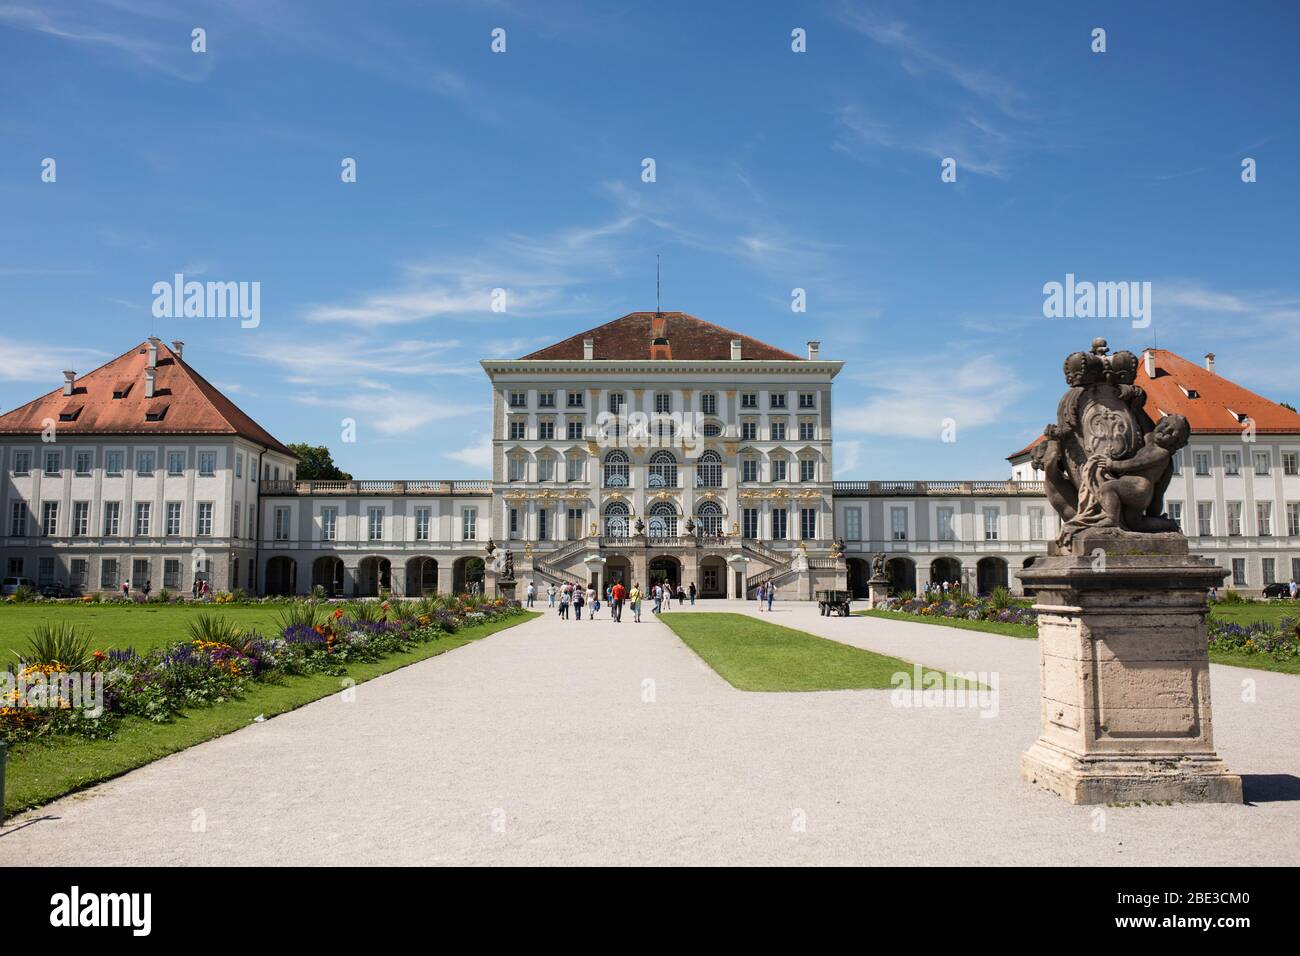 The front view of Nymphenburg Palace, the famous baroque residence of the royal family of Bavaria in Munich, Germany. Stock Photo